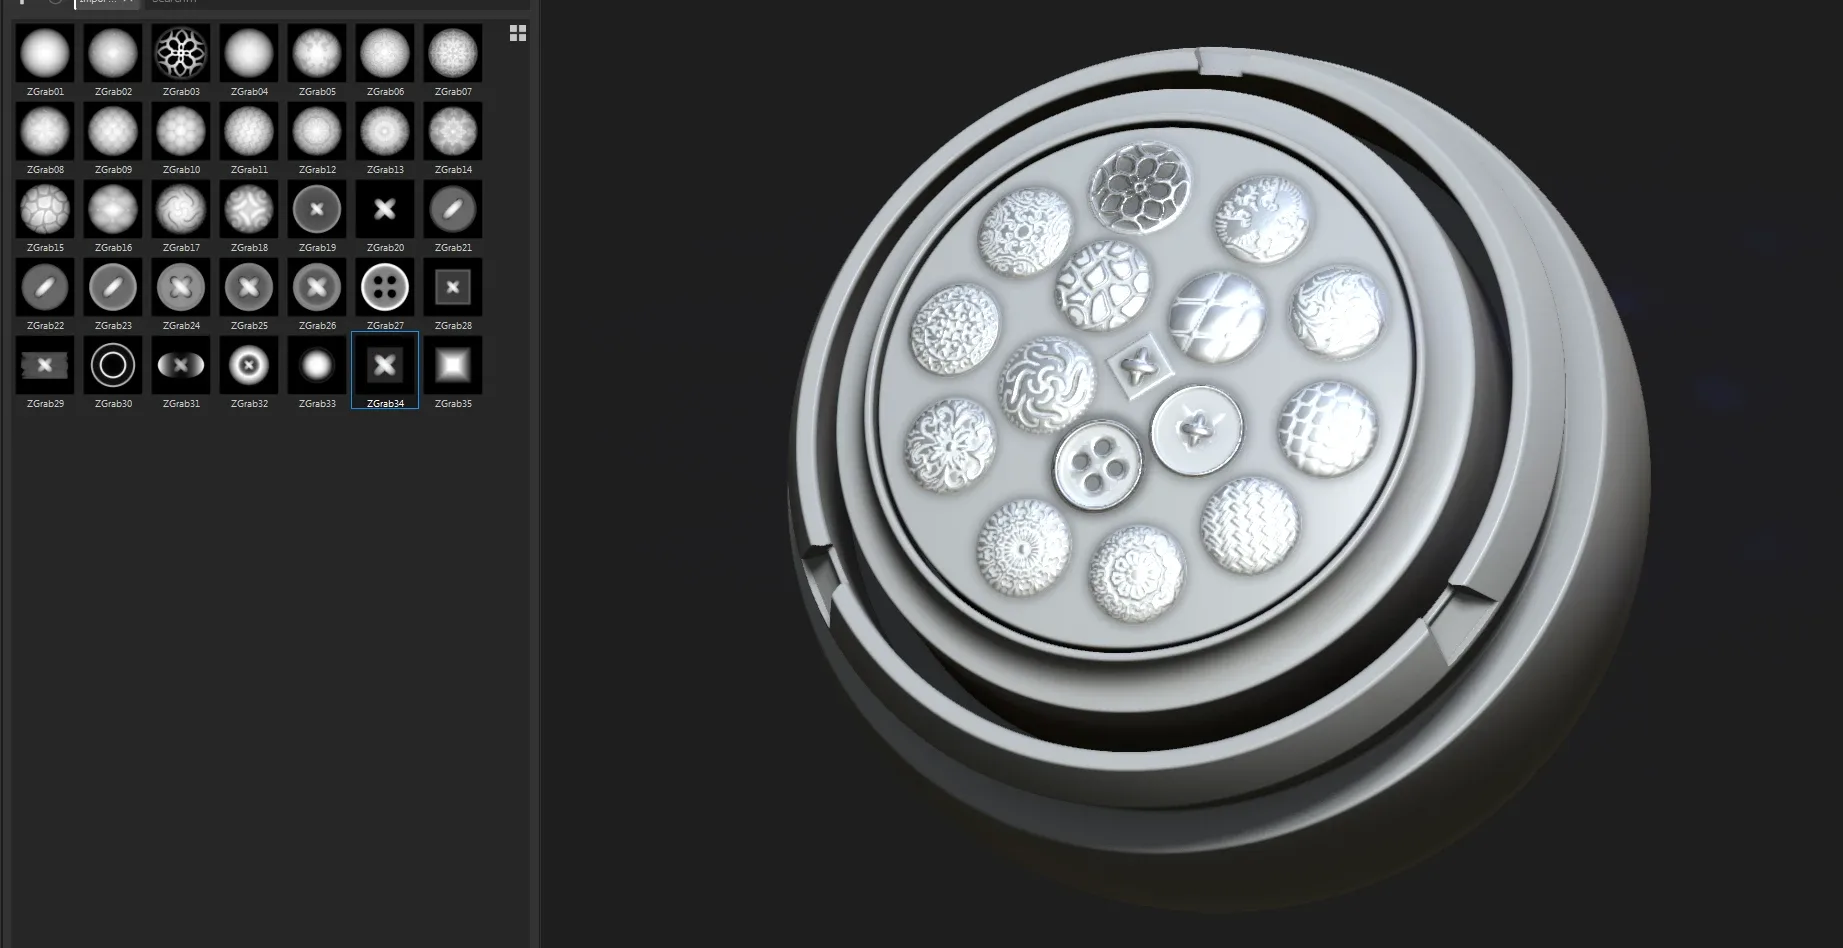 Hard Surface Zbrush Alphas buttons